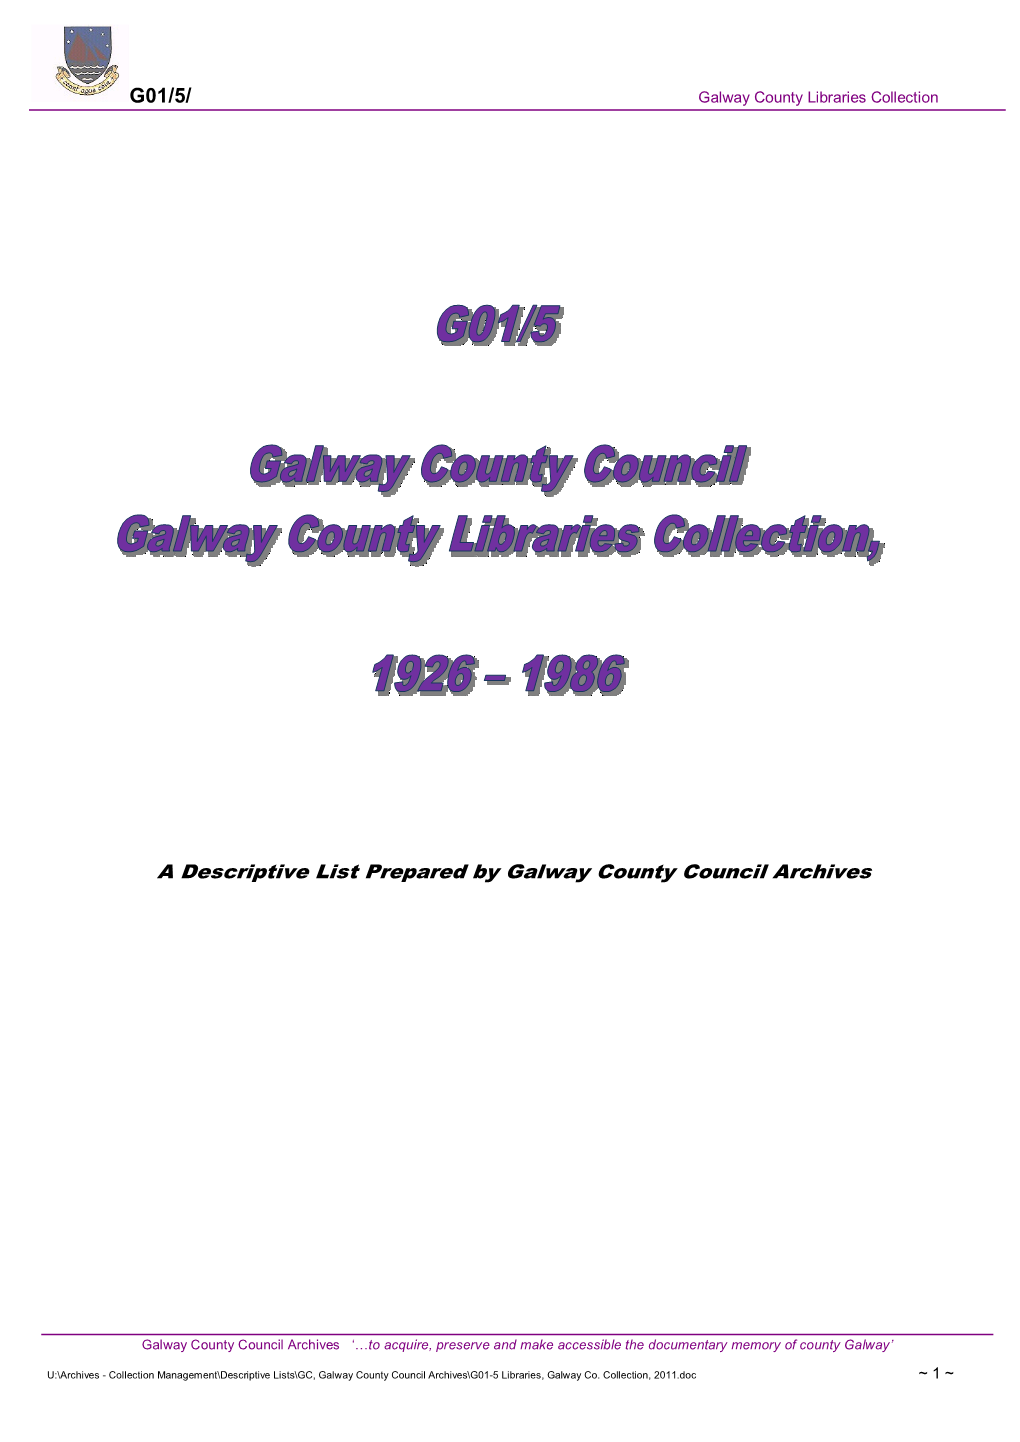 G01/5/ a Descriptive List Prepared by Galway County Council Archives